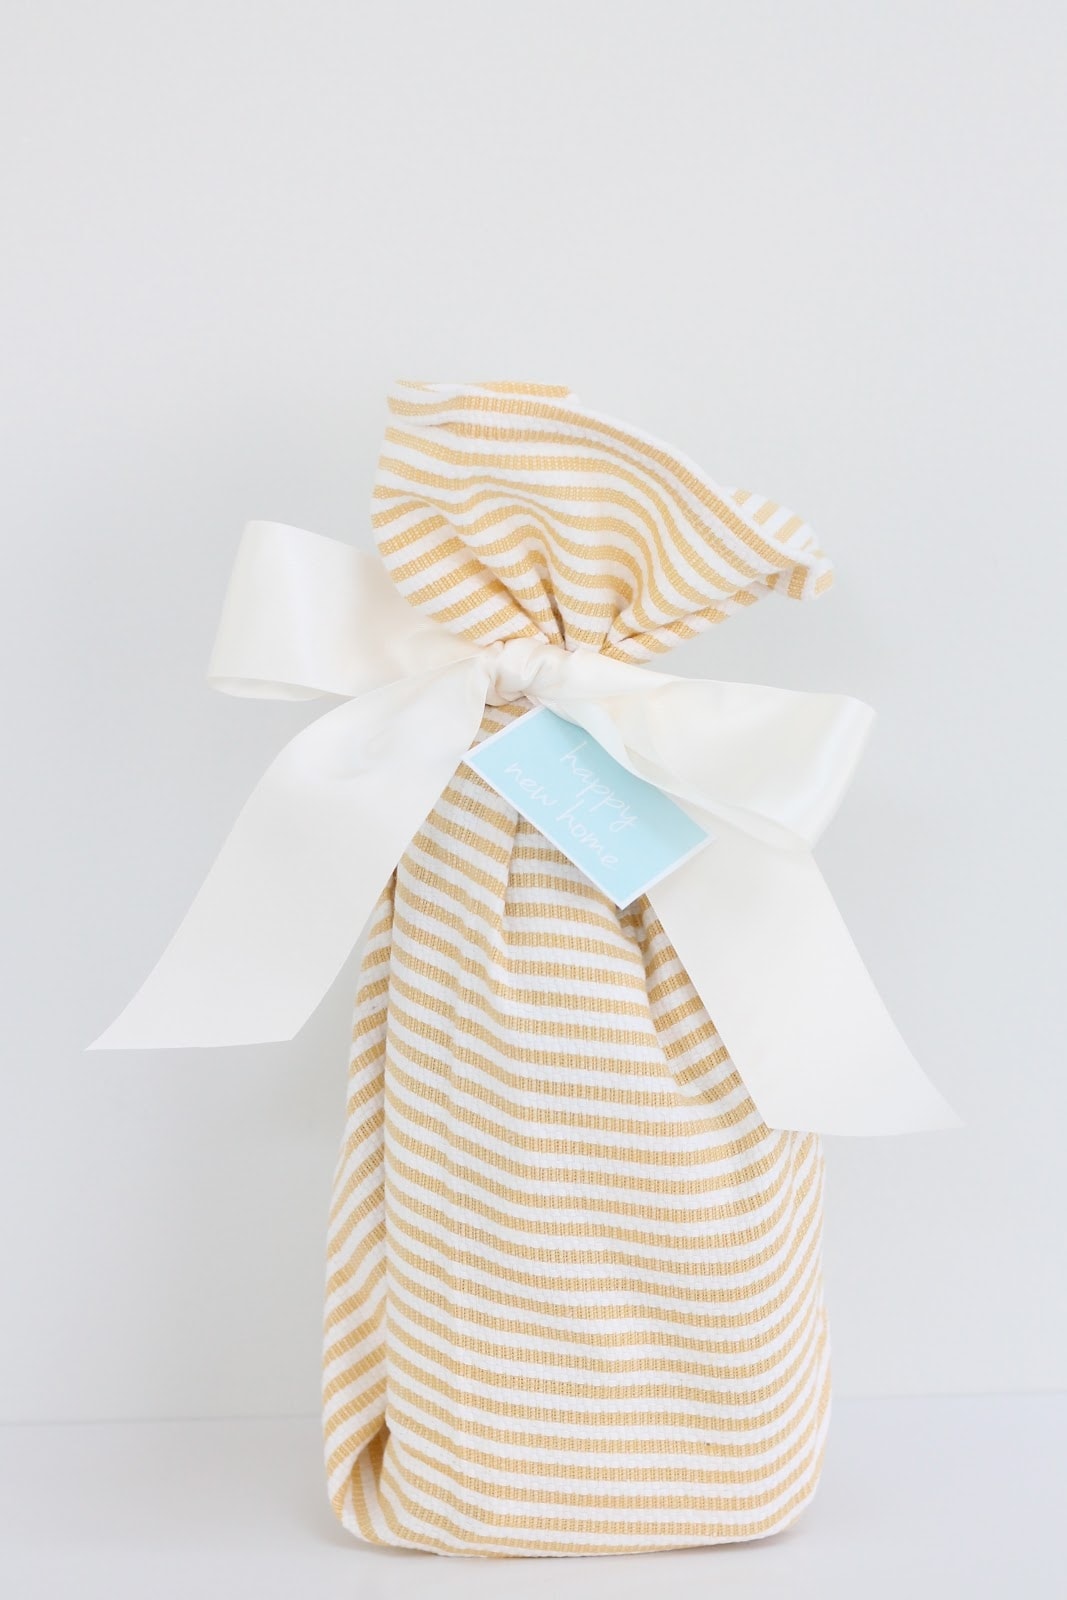 A housewarming gift wrapped in a tea towel and tied with a gift card